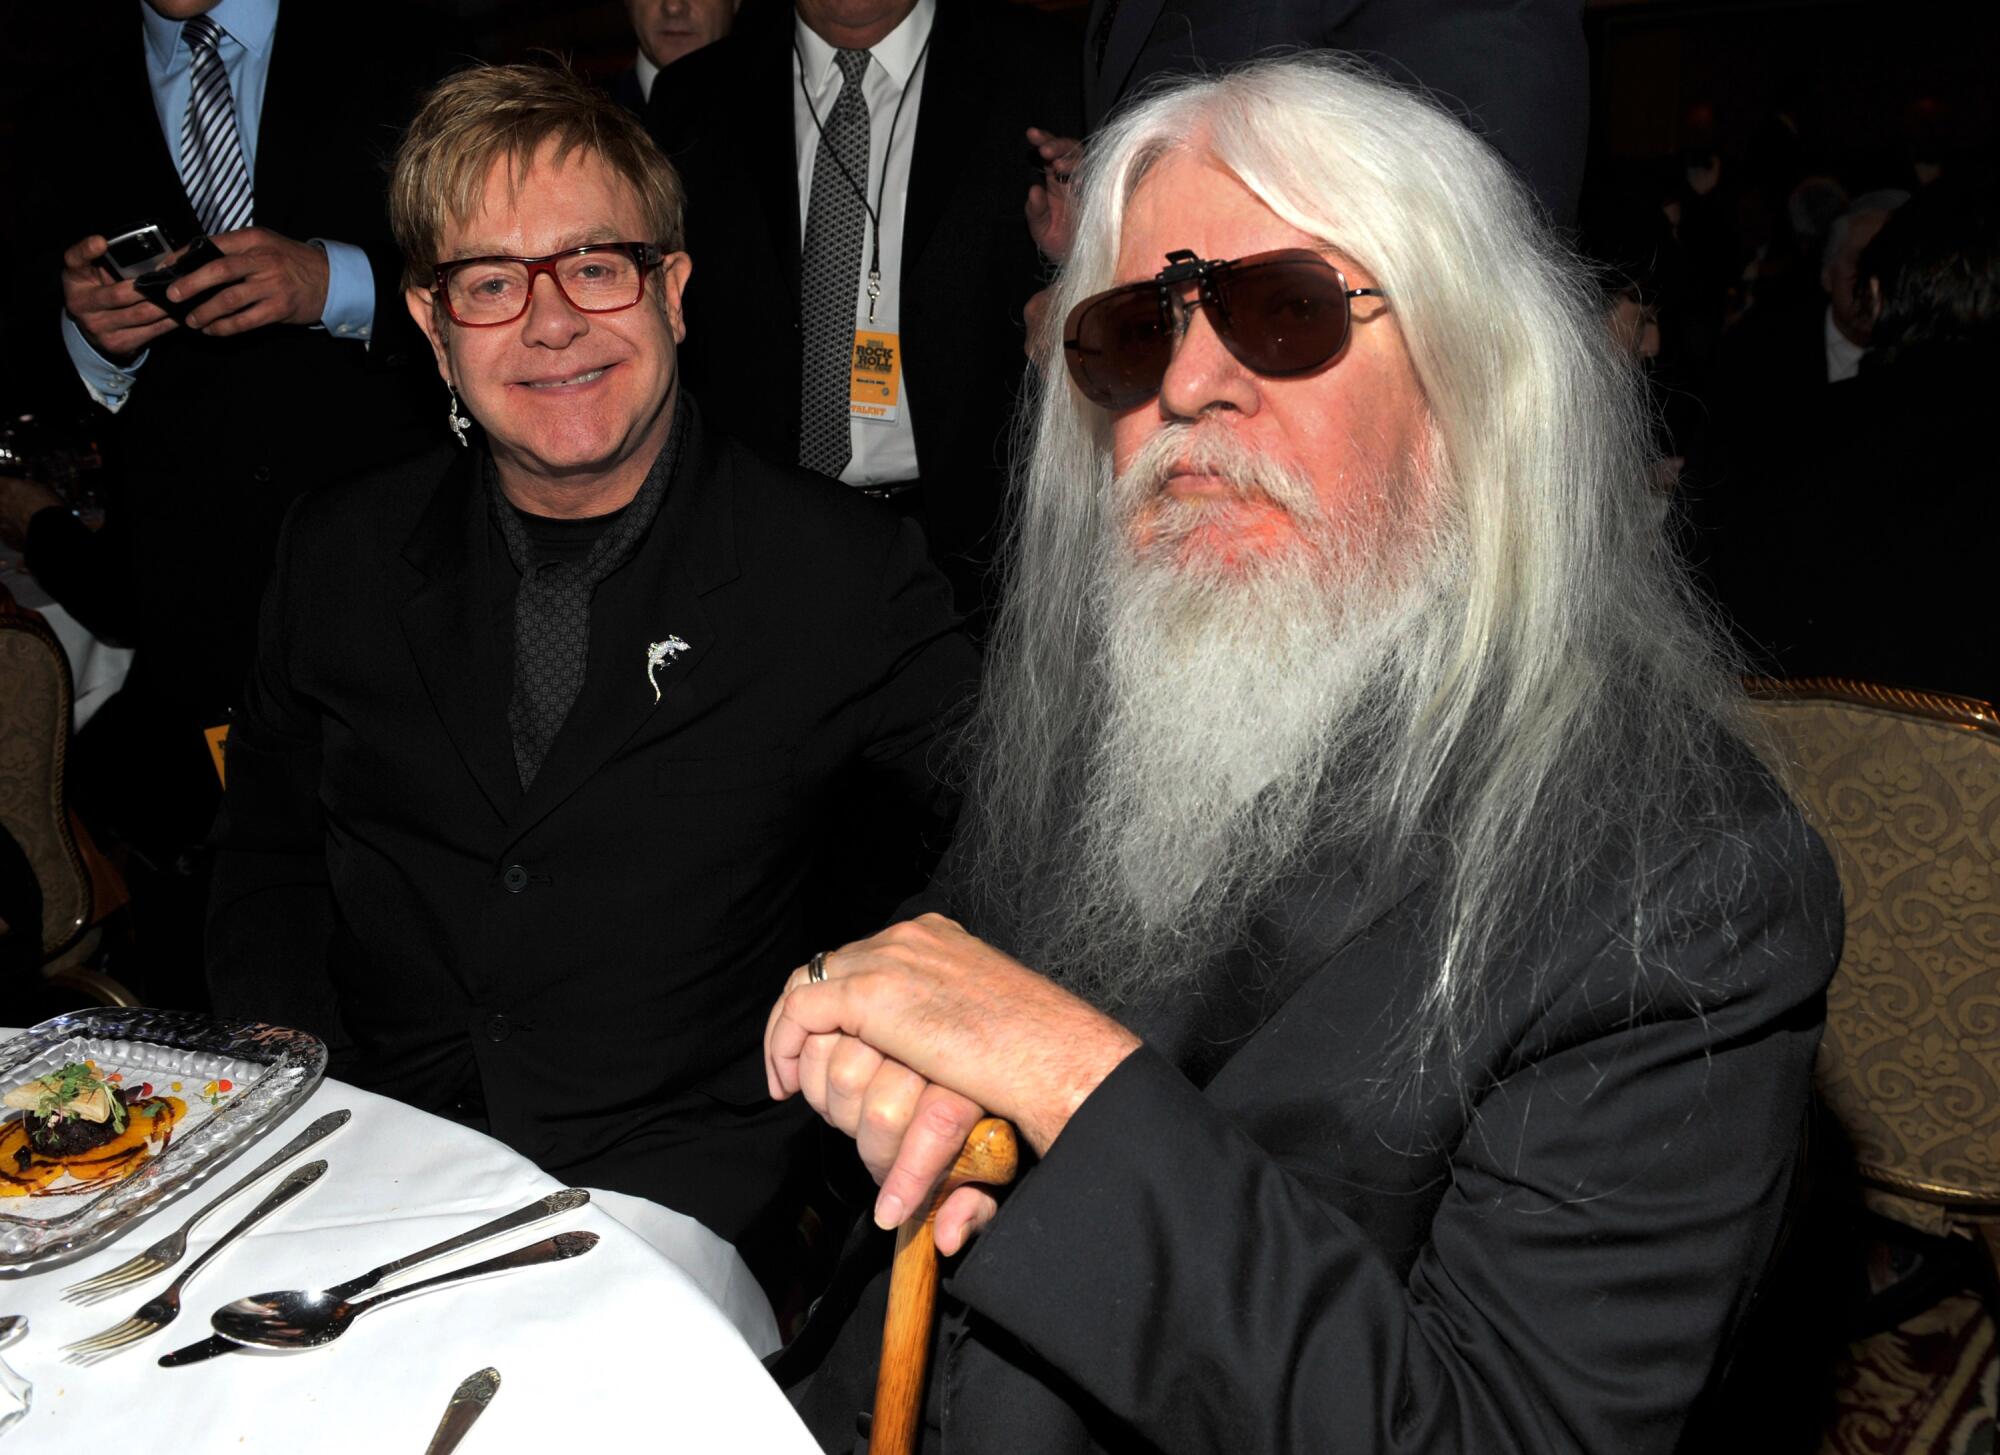 Elton John and Leon Russell at the Rock & Roll Hall of Fame Induction Ceremony in 2011.